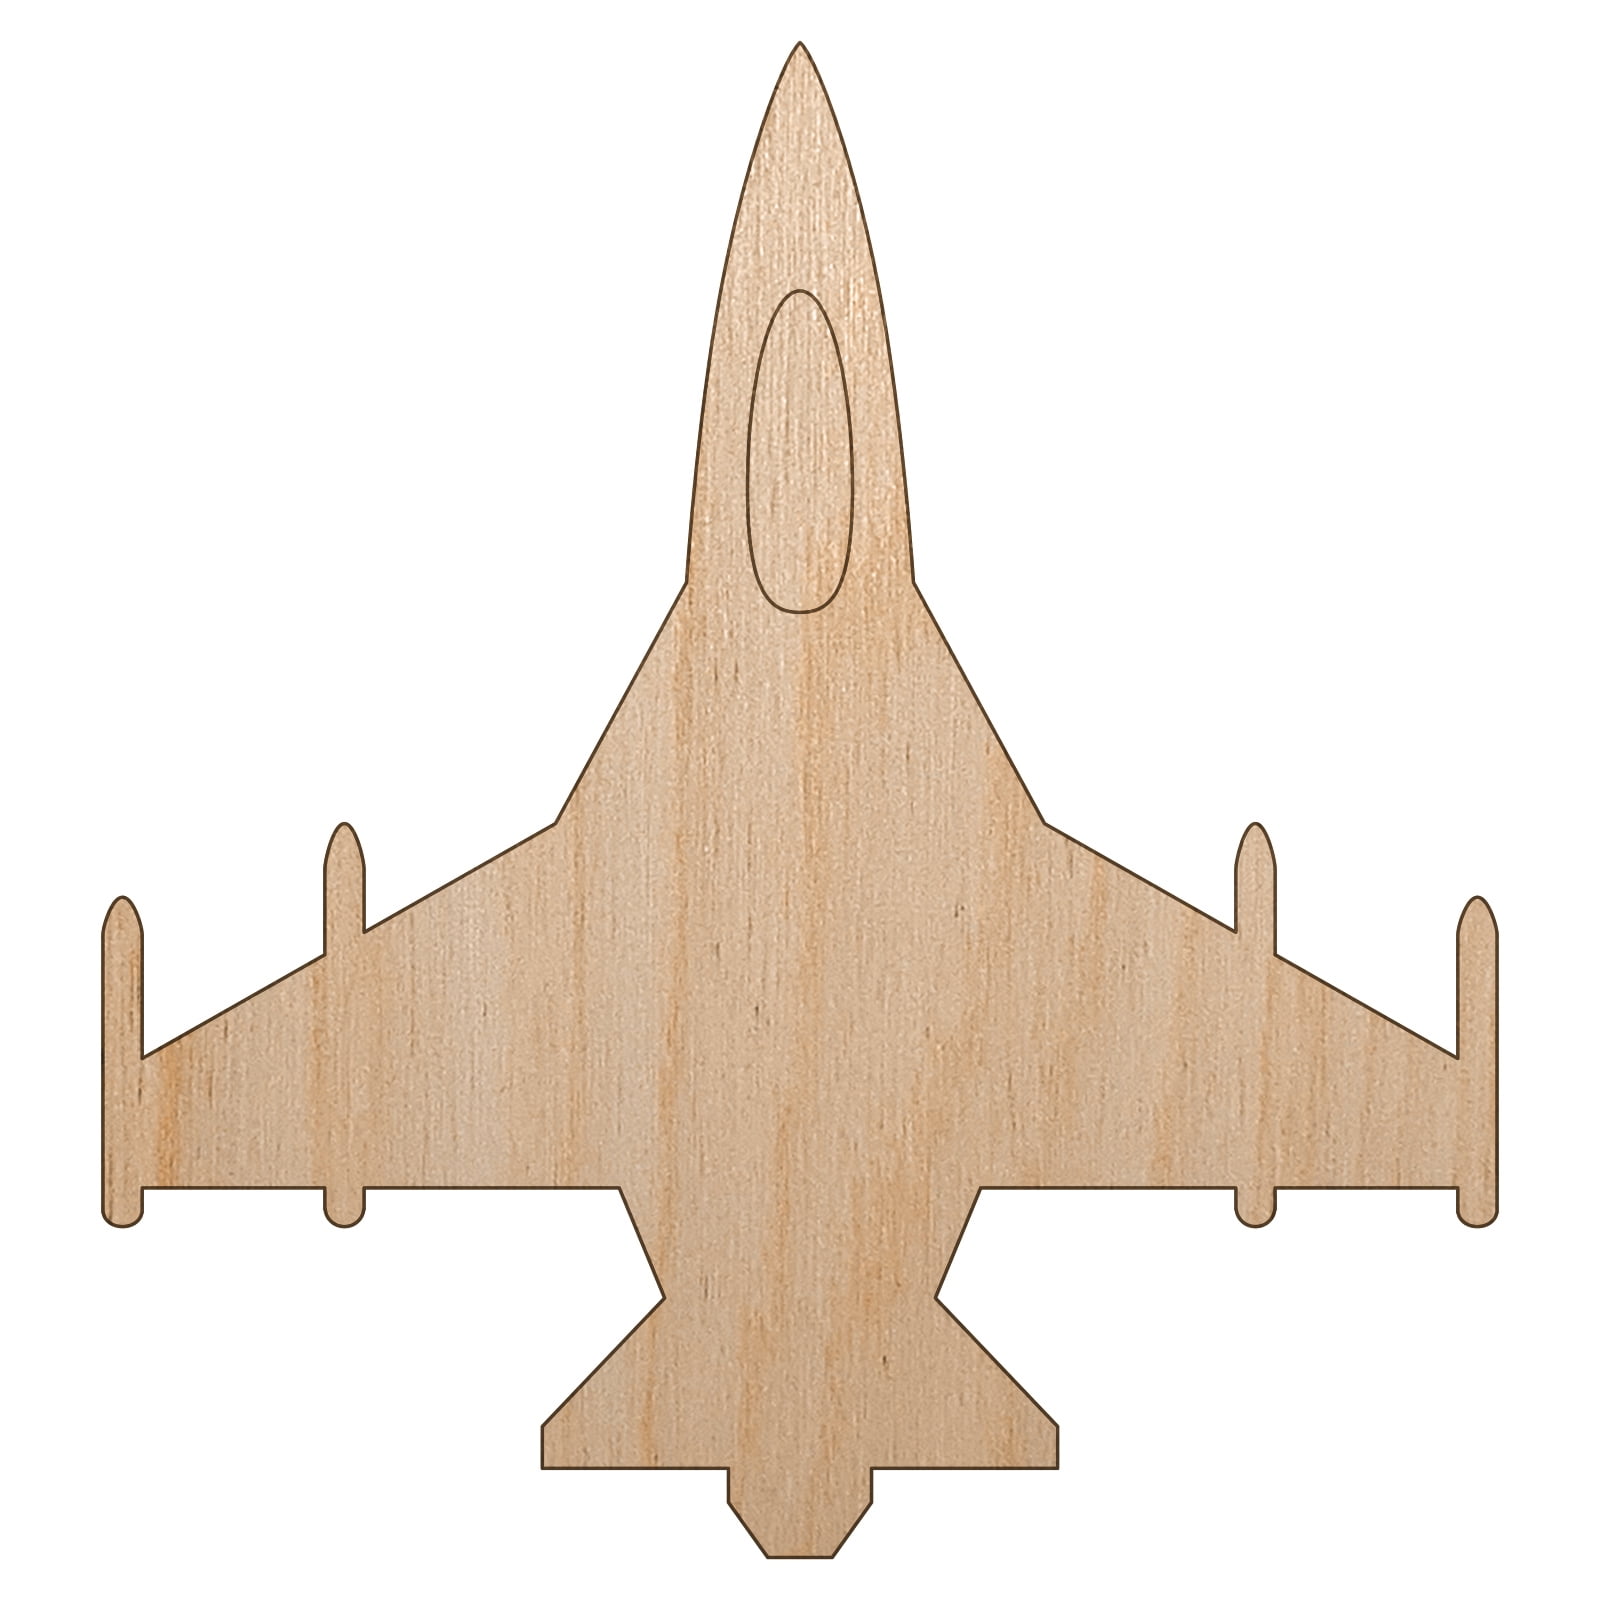 DIY Wood Craft Cutout Blank Vehicles Plane Jet Airplane Unfinished Wooden Shape